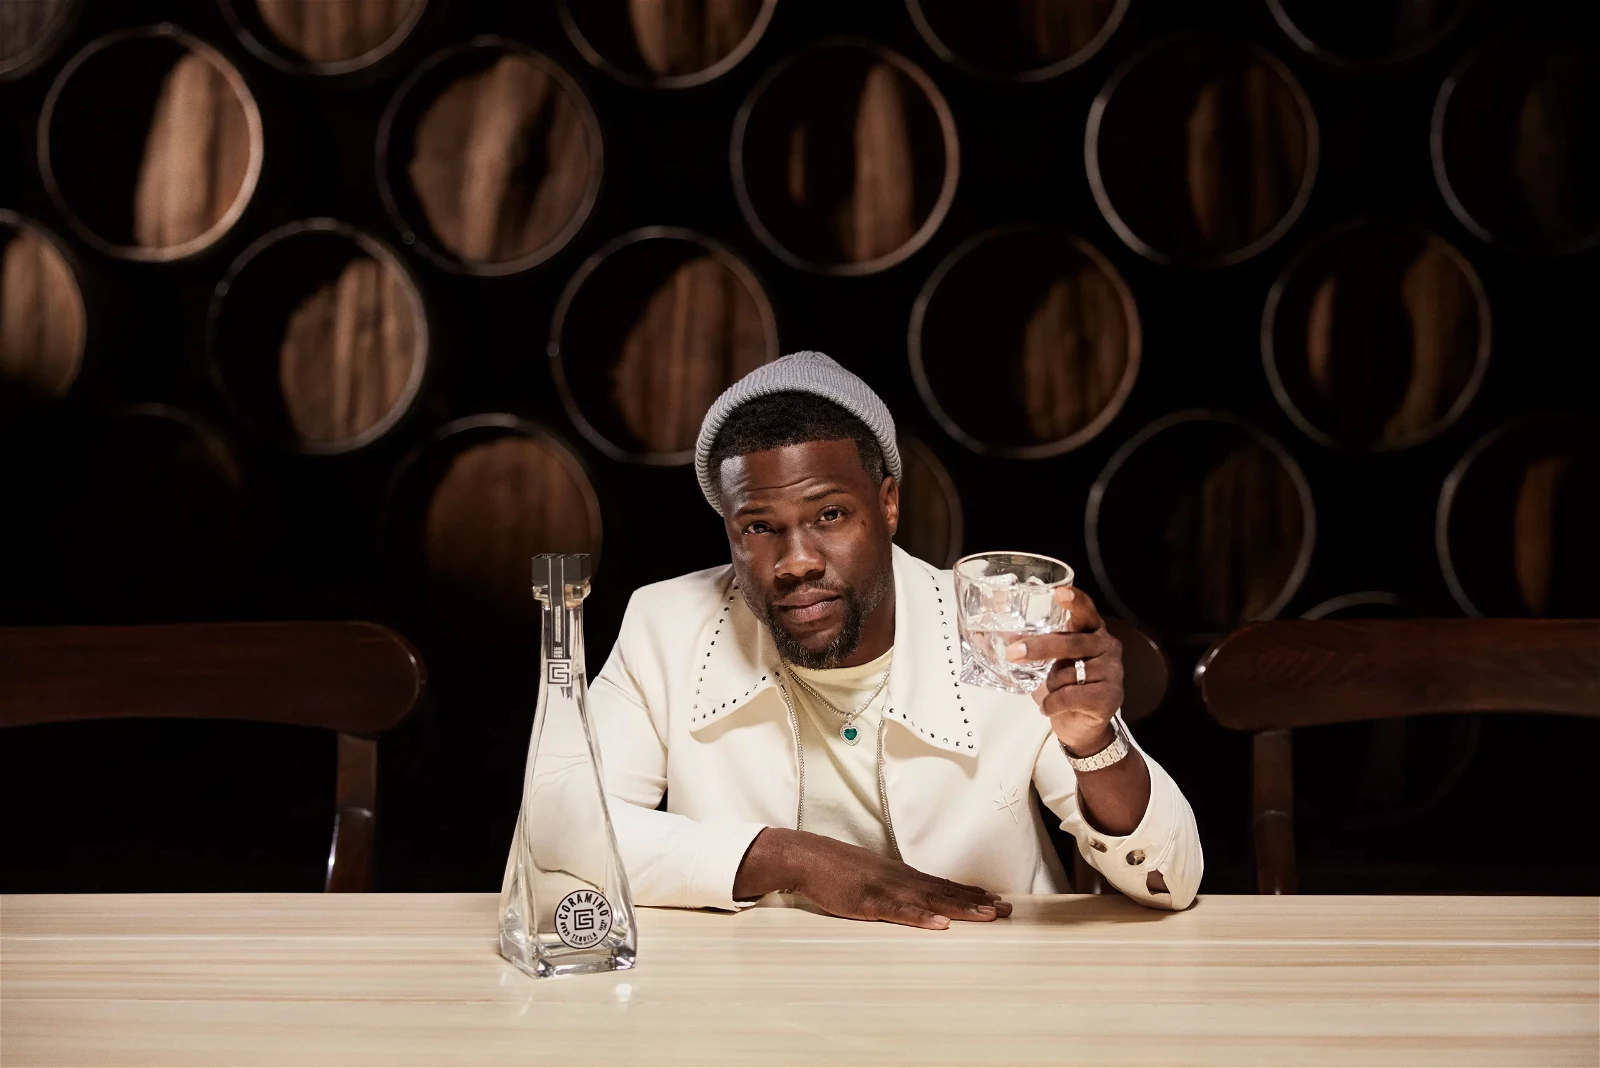 Kevin Hart promoting his tequila brand, Gran Coramino